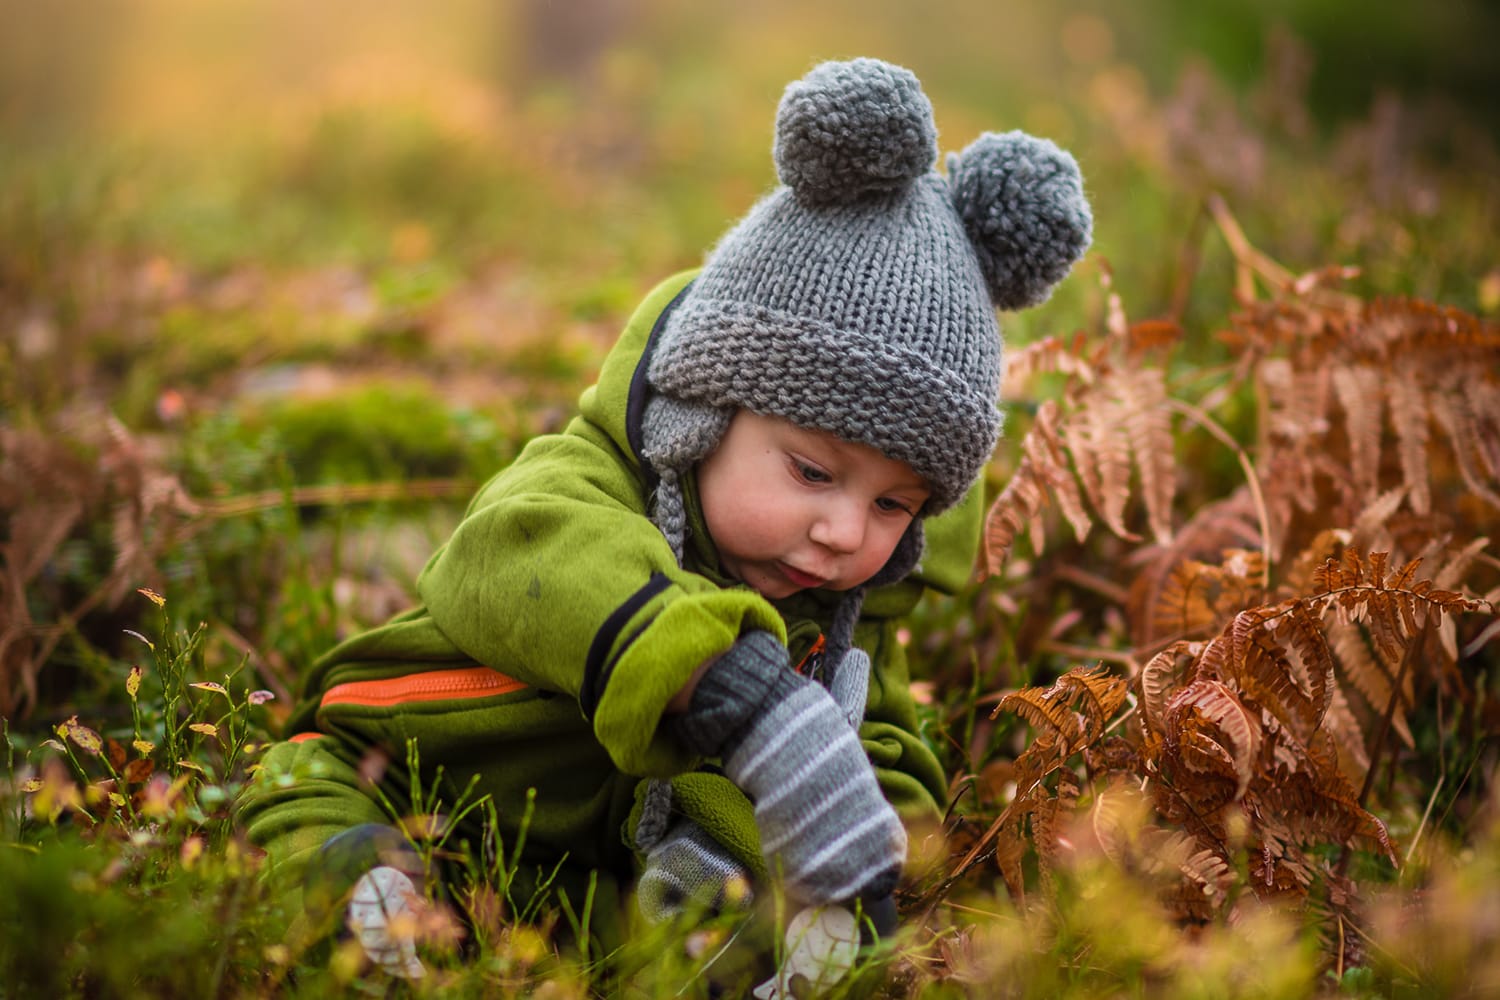 Can't-Miss Tips For Photographing Small Children